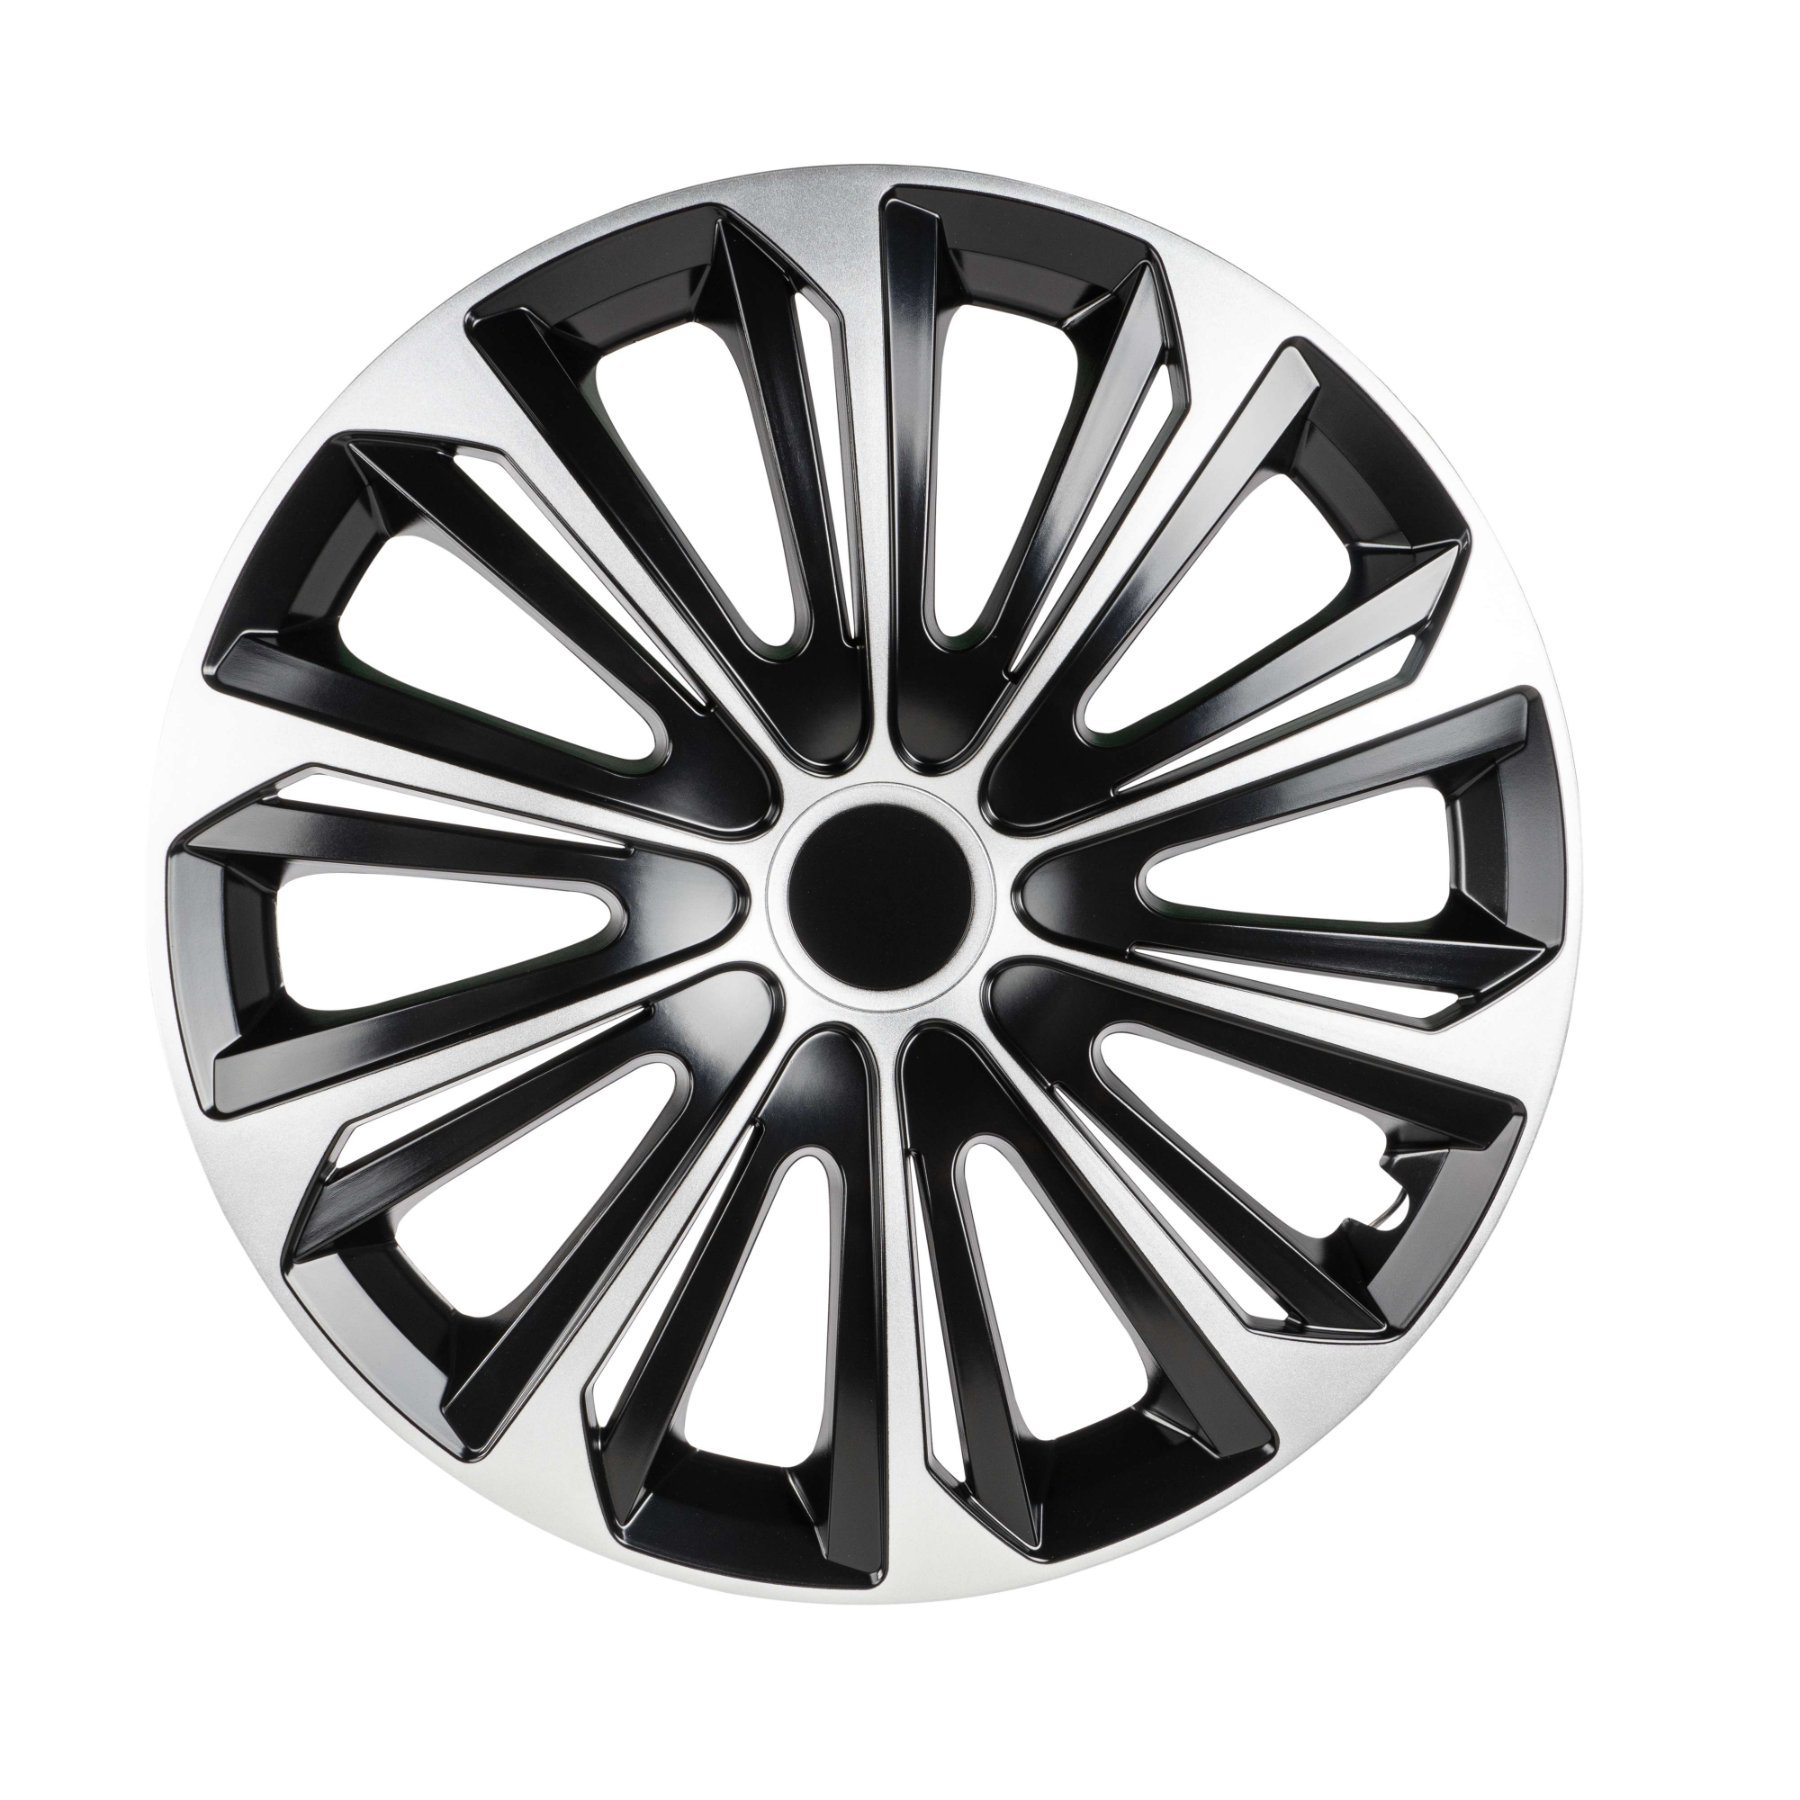 Wheel covers New Racer 14", 4 piece black/silver